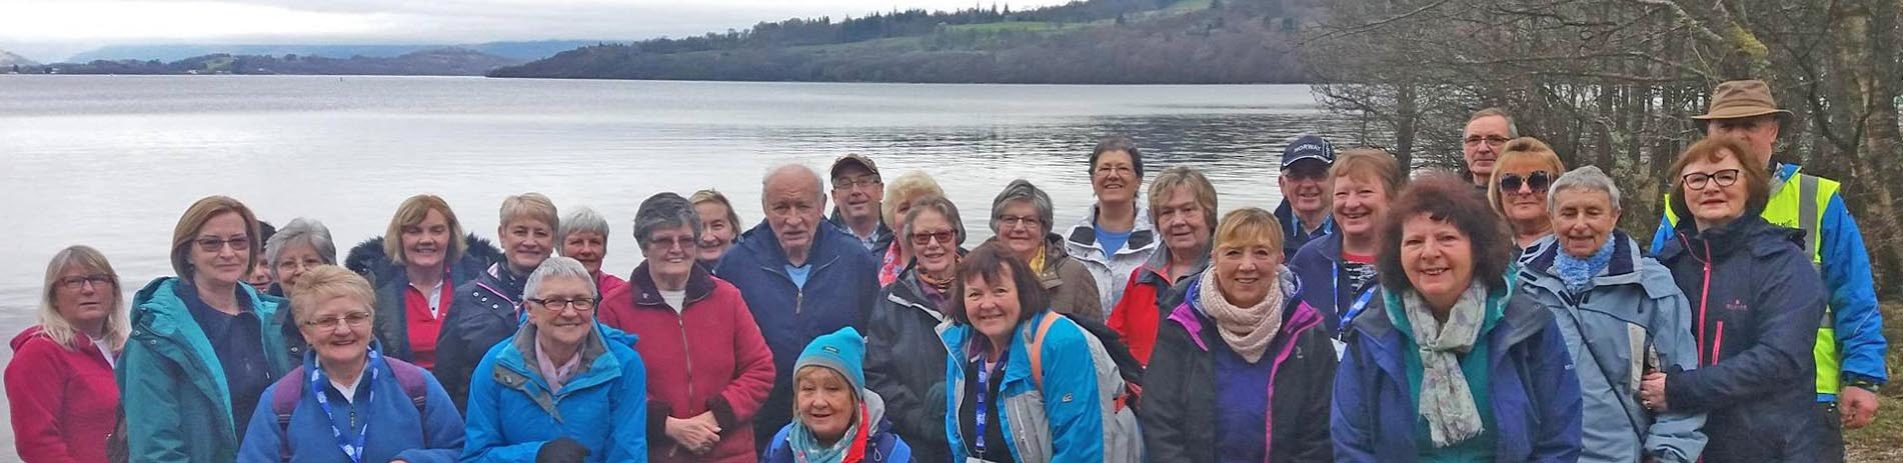 group-of-elderly-in-outdoor-jackets-part-of-walking-group-at-the-edge-of-loch-lomond